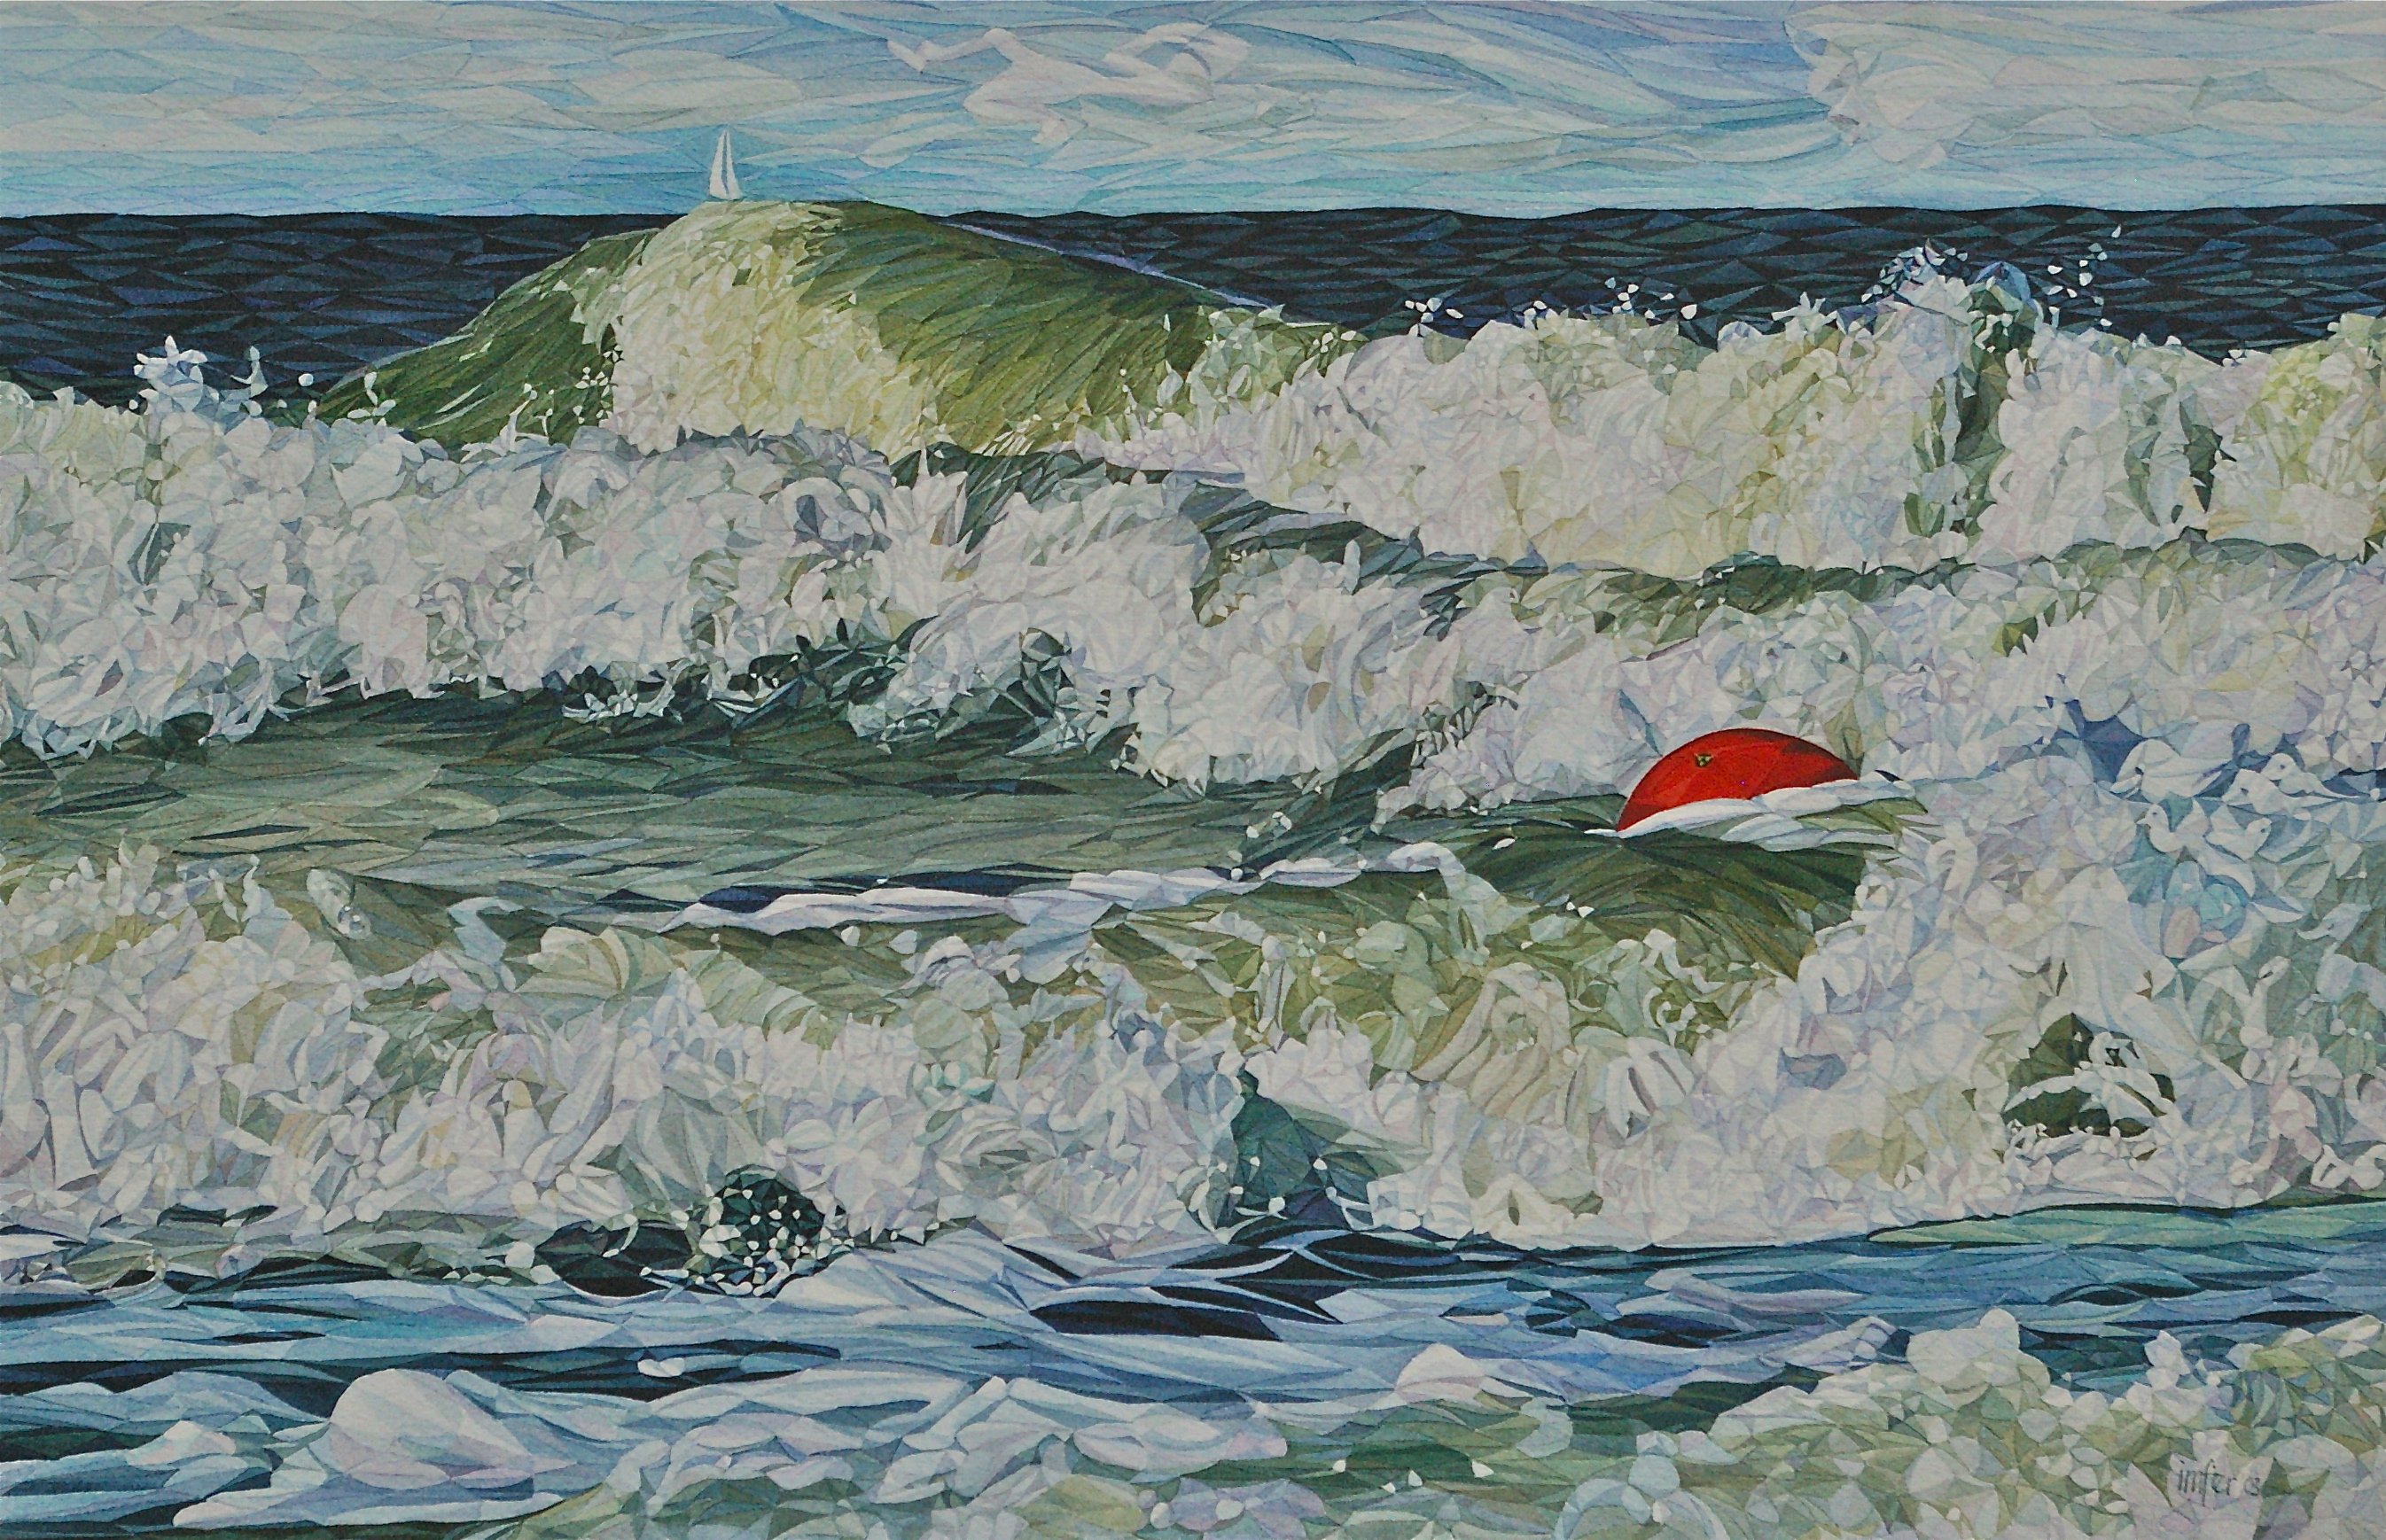 Imelda Feraille; Verzeild, 2013, Original Watercolor, 49 x 32 cm. Artwork description: 241  You have to beware of these waves or they will swallow you and your boat right down!  This is the power of the water. ...